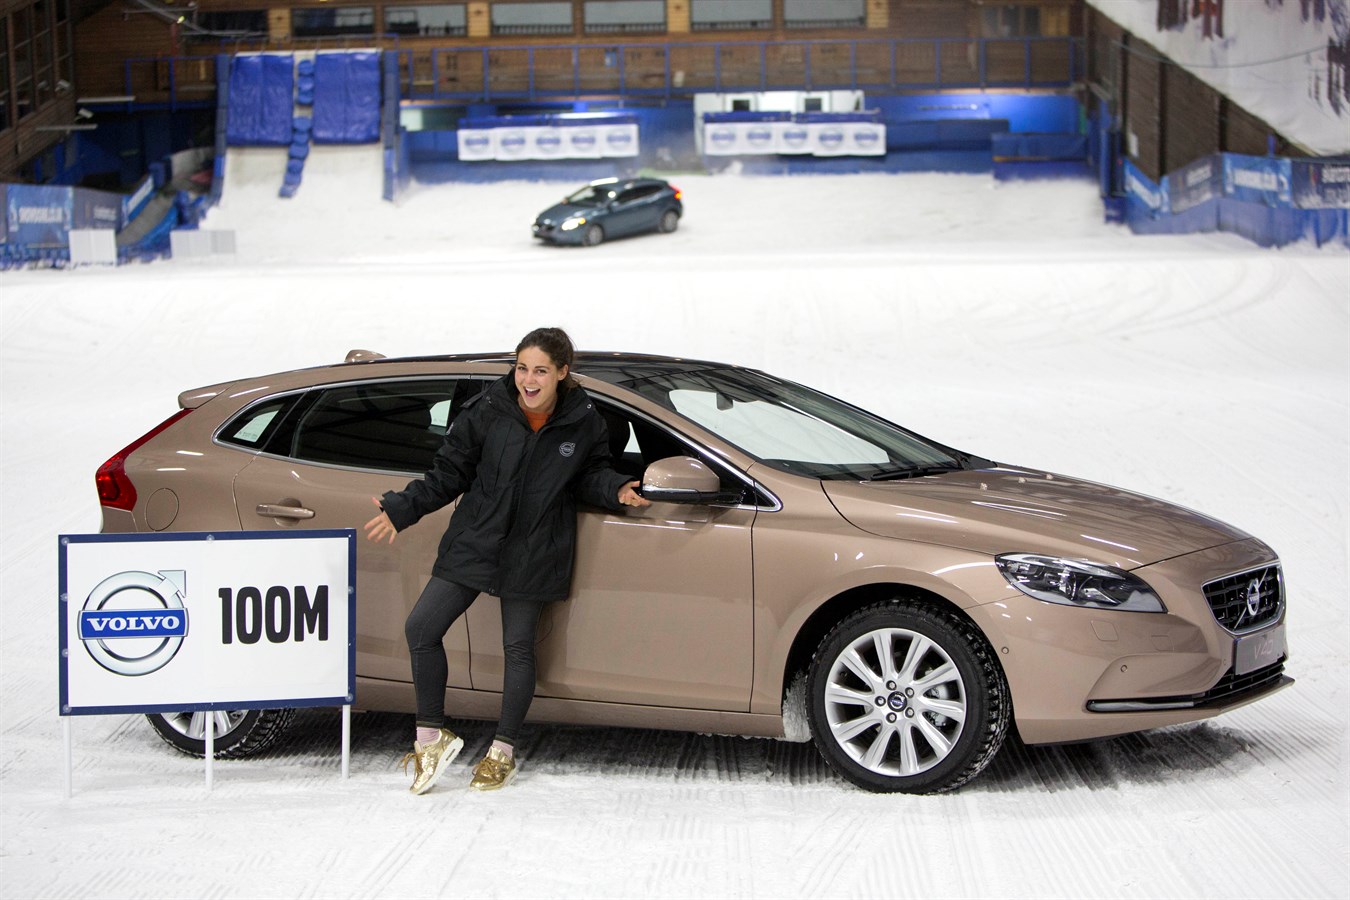 Louise Thompson, star of TV's Made in Chelsea demonstrates the advantages of winter tyres for driving in snow